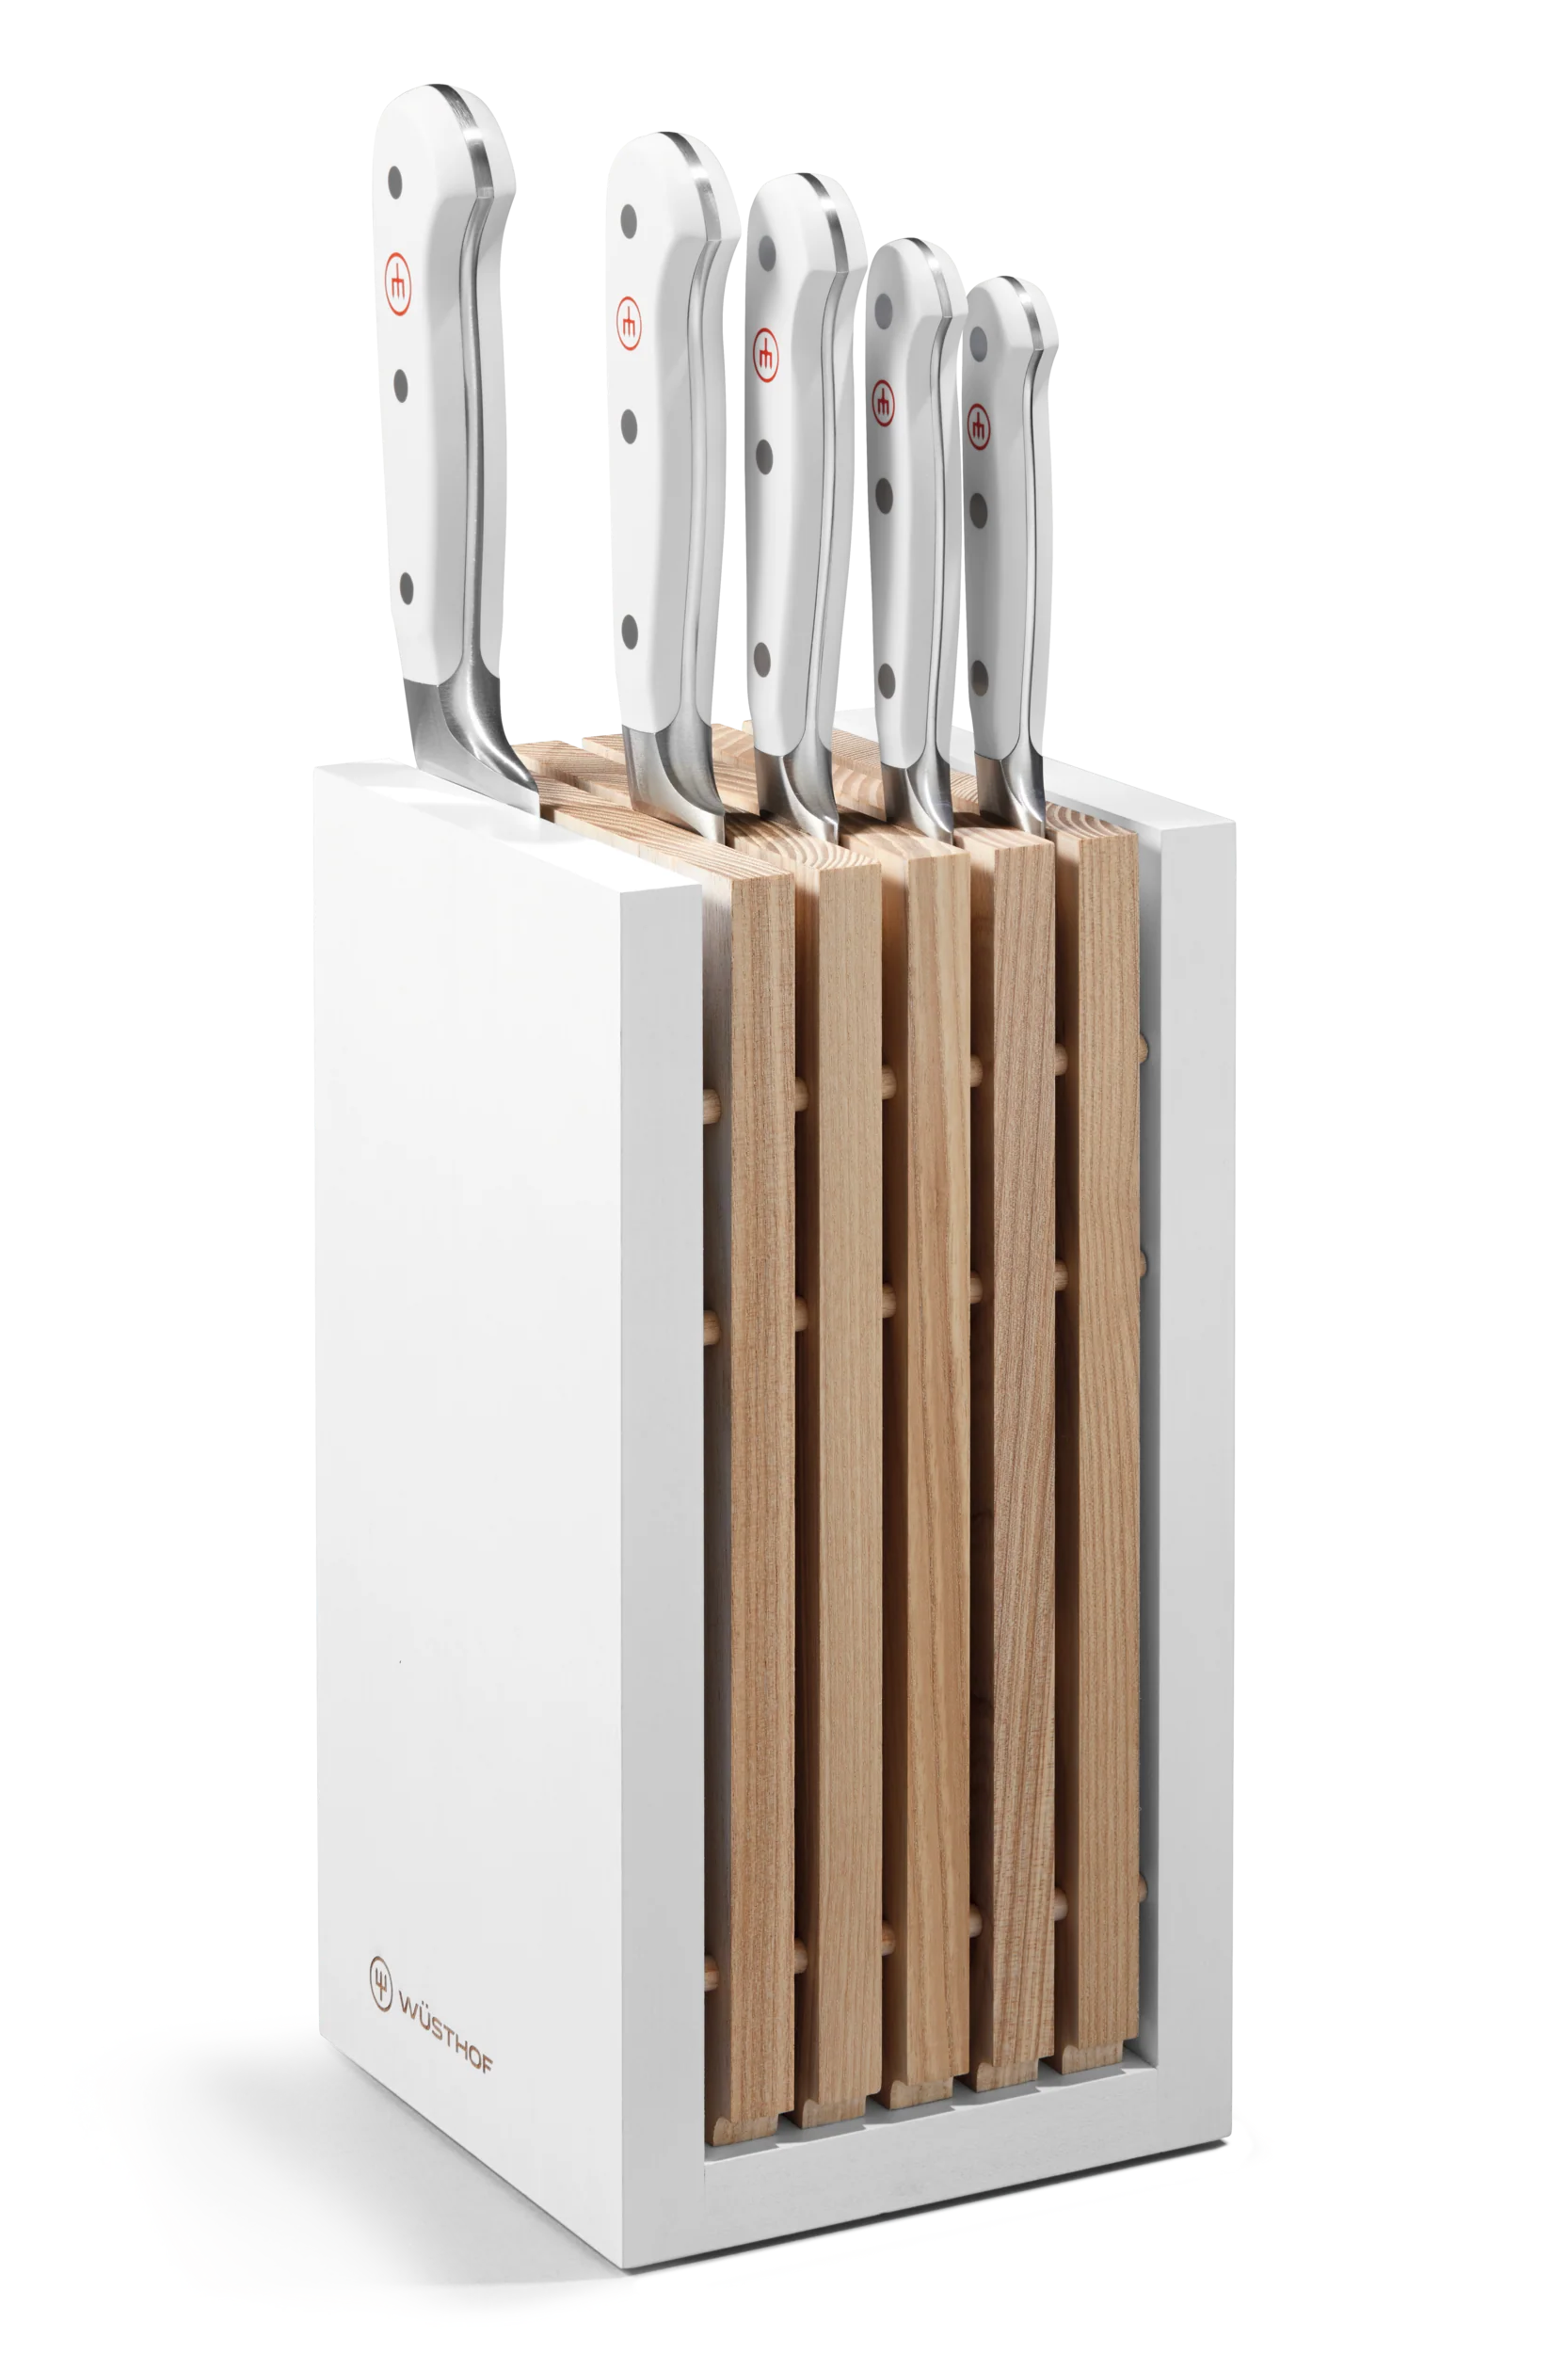 Wusthof Classic White 6-piece Knife Block Set with Bread Knife